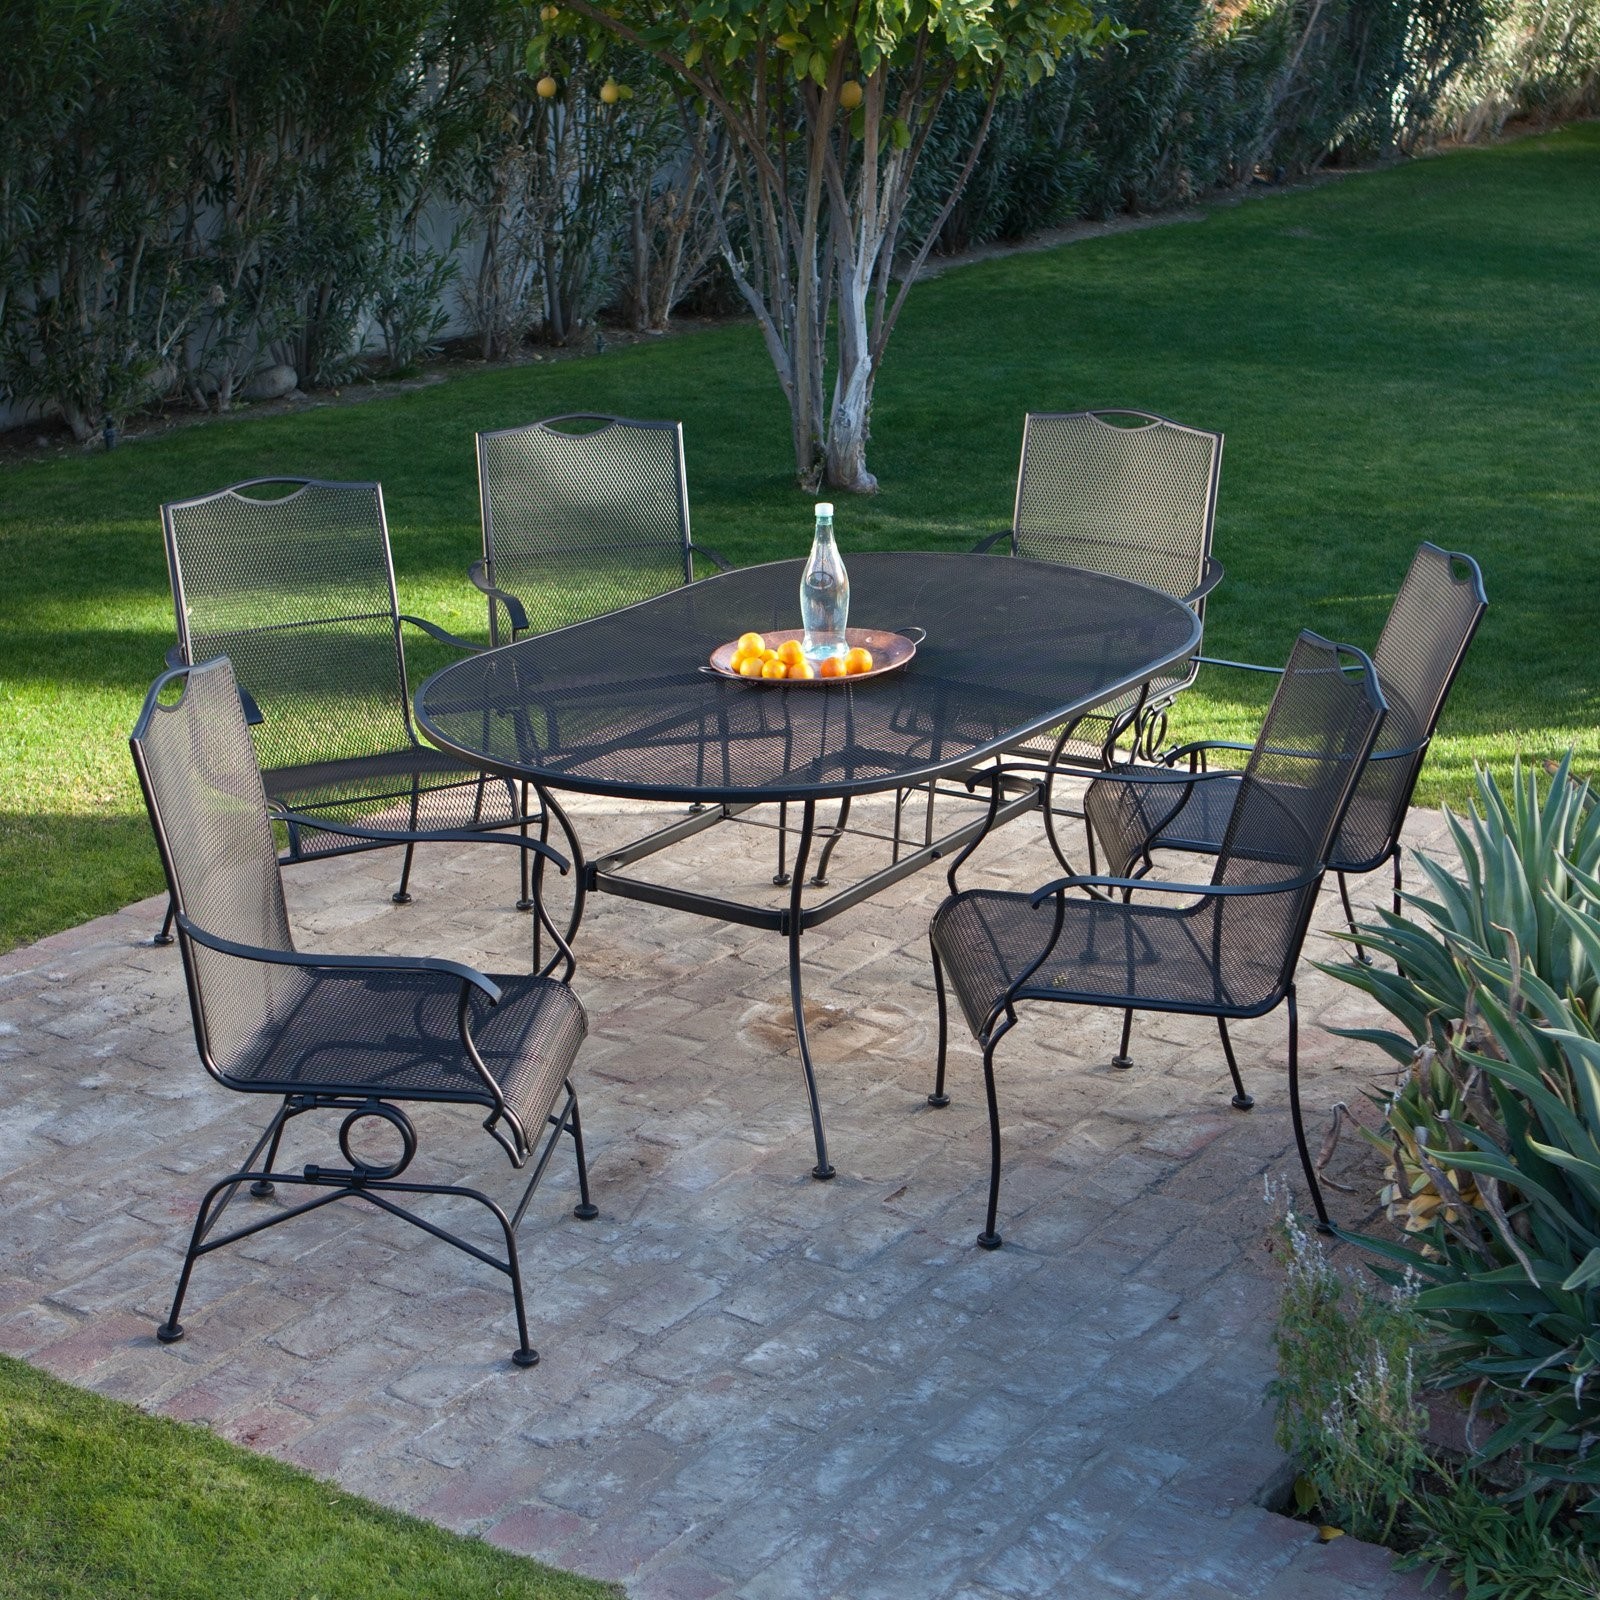 Wrought Iron Patio Furniture Sets - Ideas on Foter